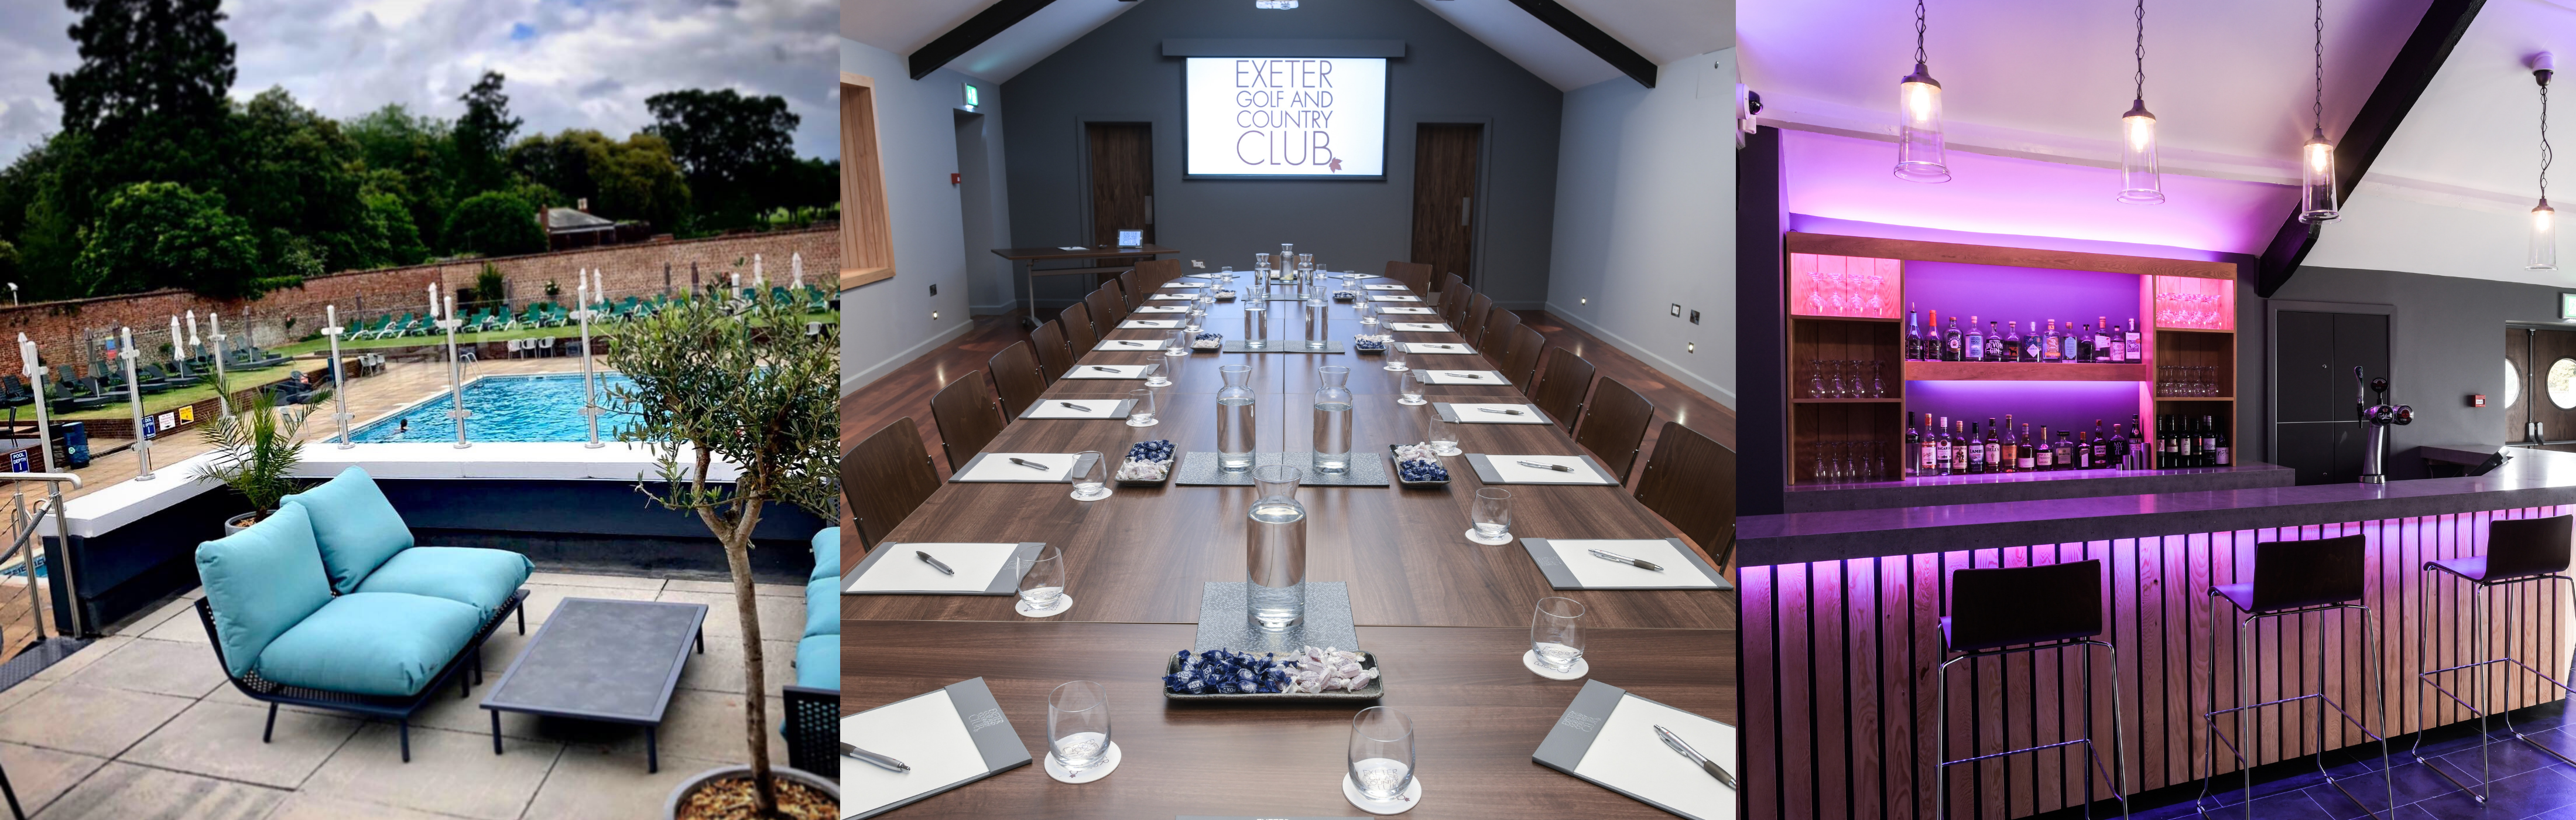 mews, exeter, exeter golf and country club, meeting rooms, function rooms